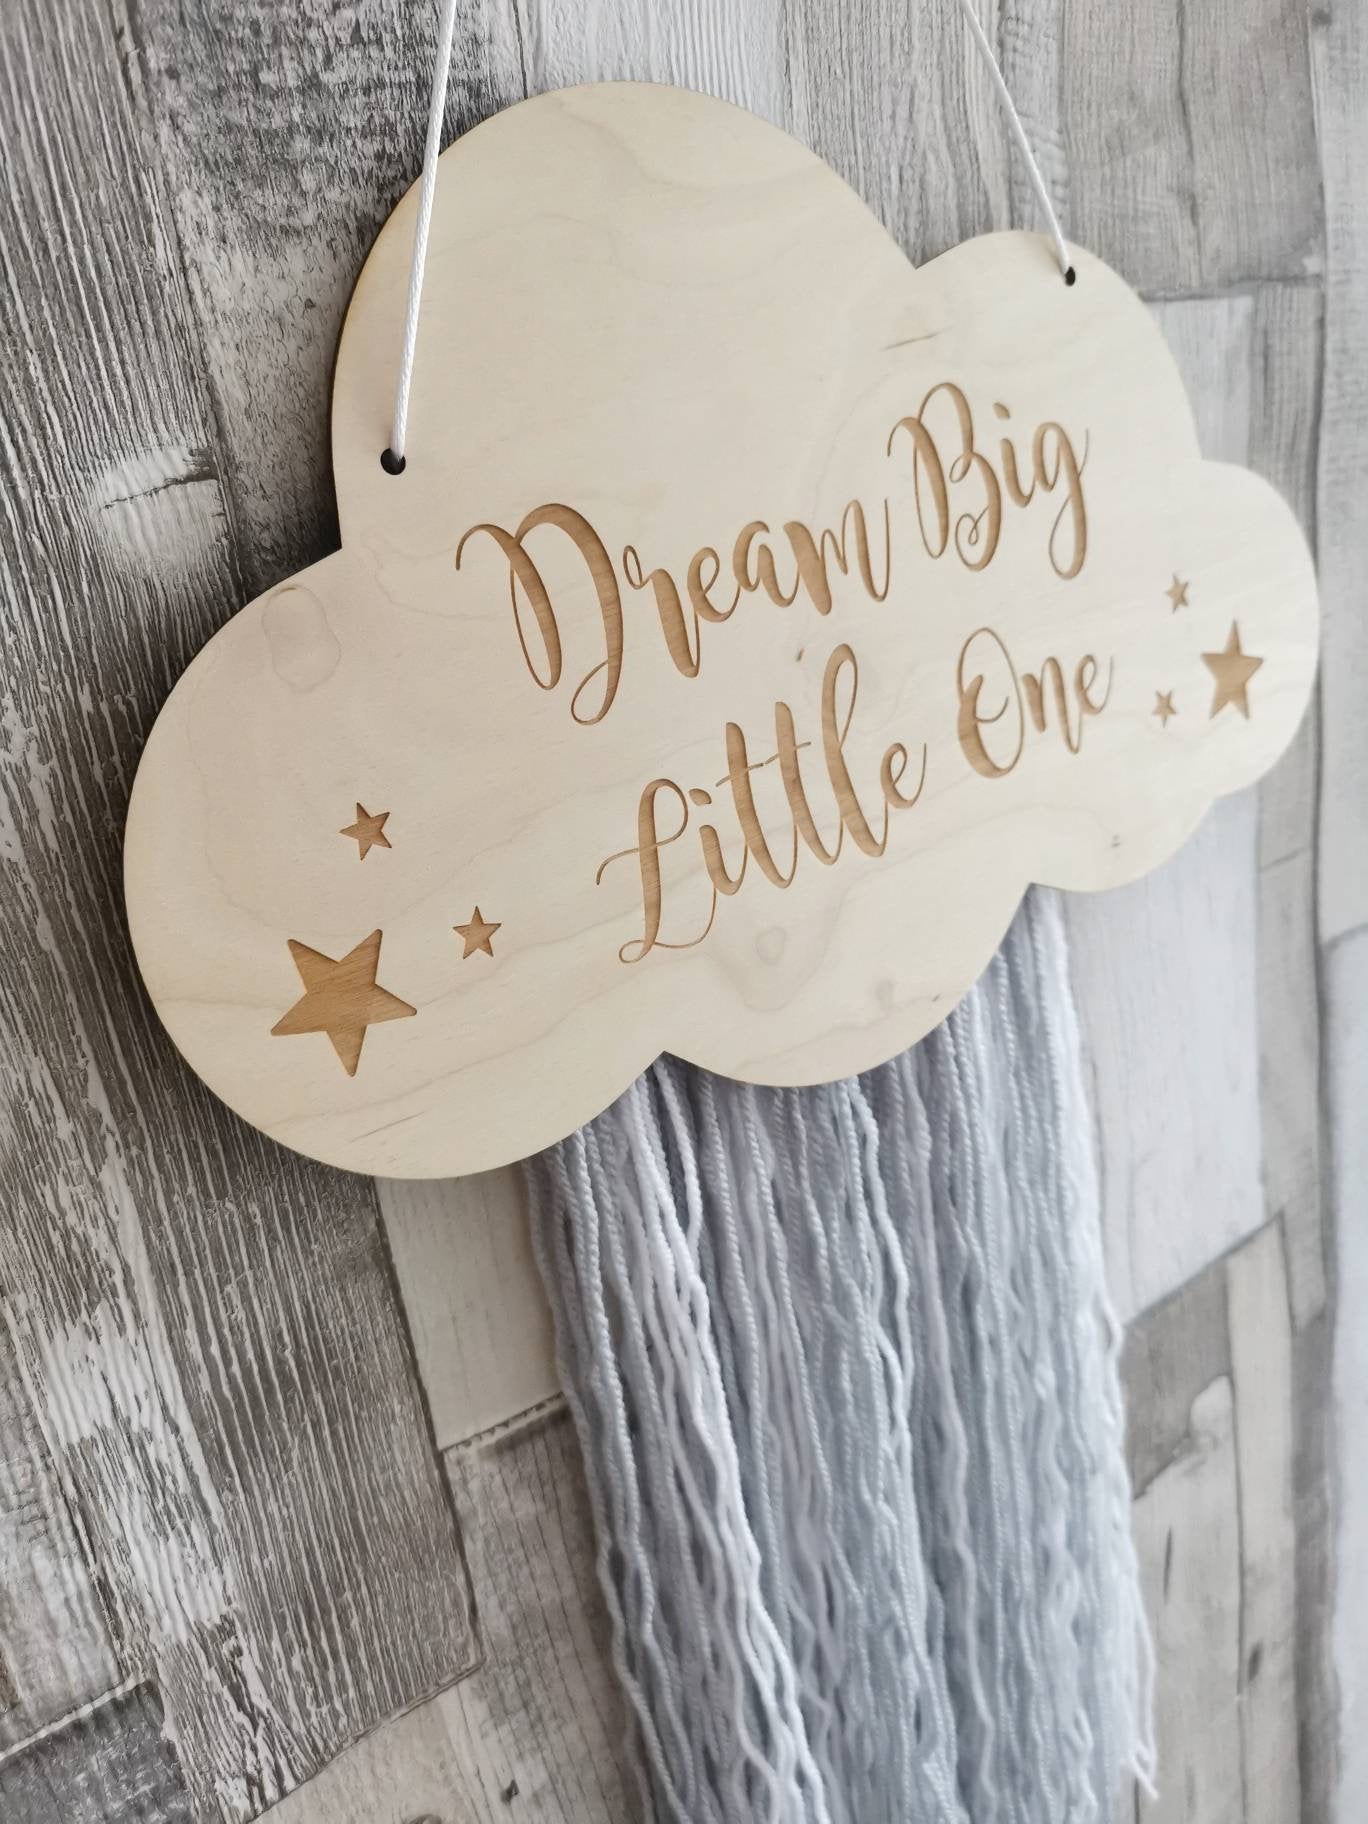 Dream Big Little One Engraved Cloud Wall Hanger - Grey & White